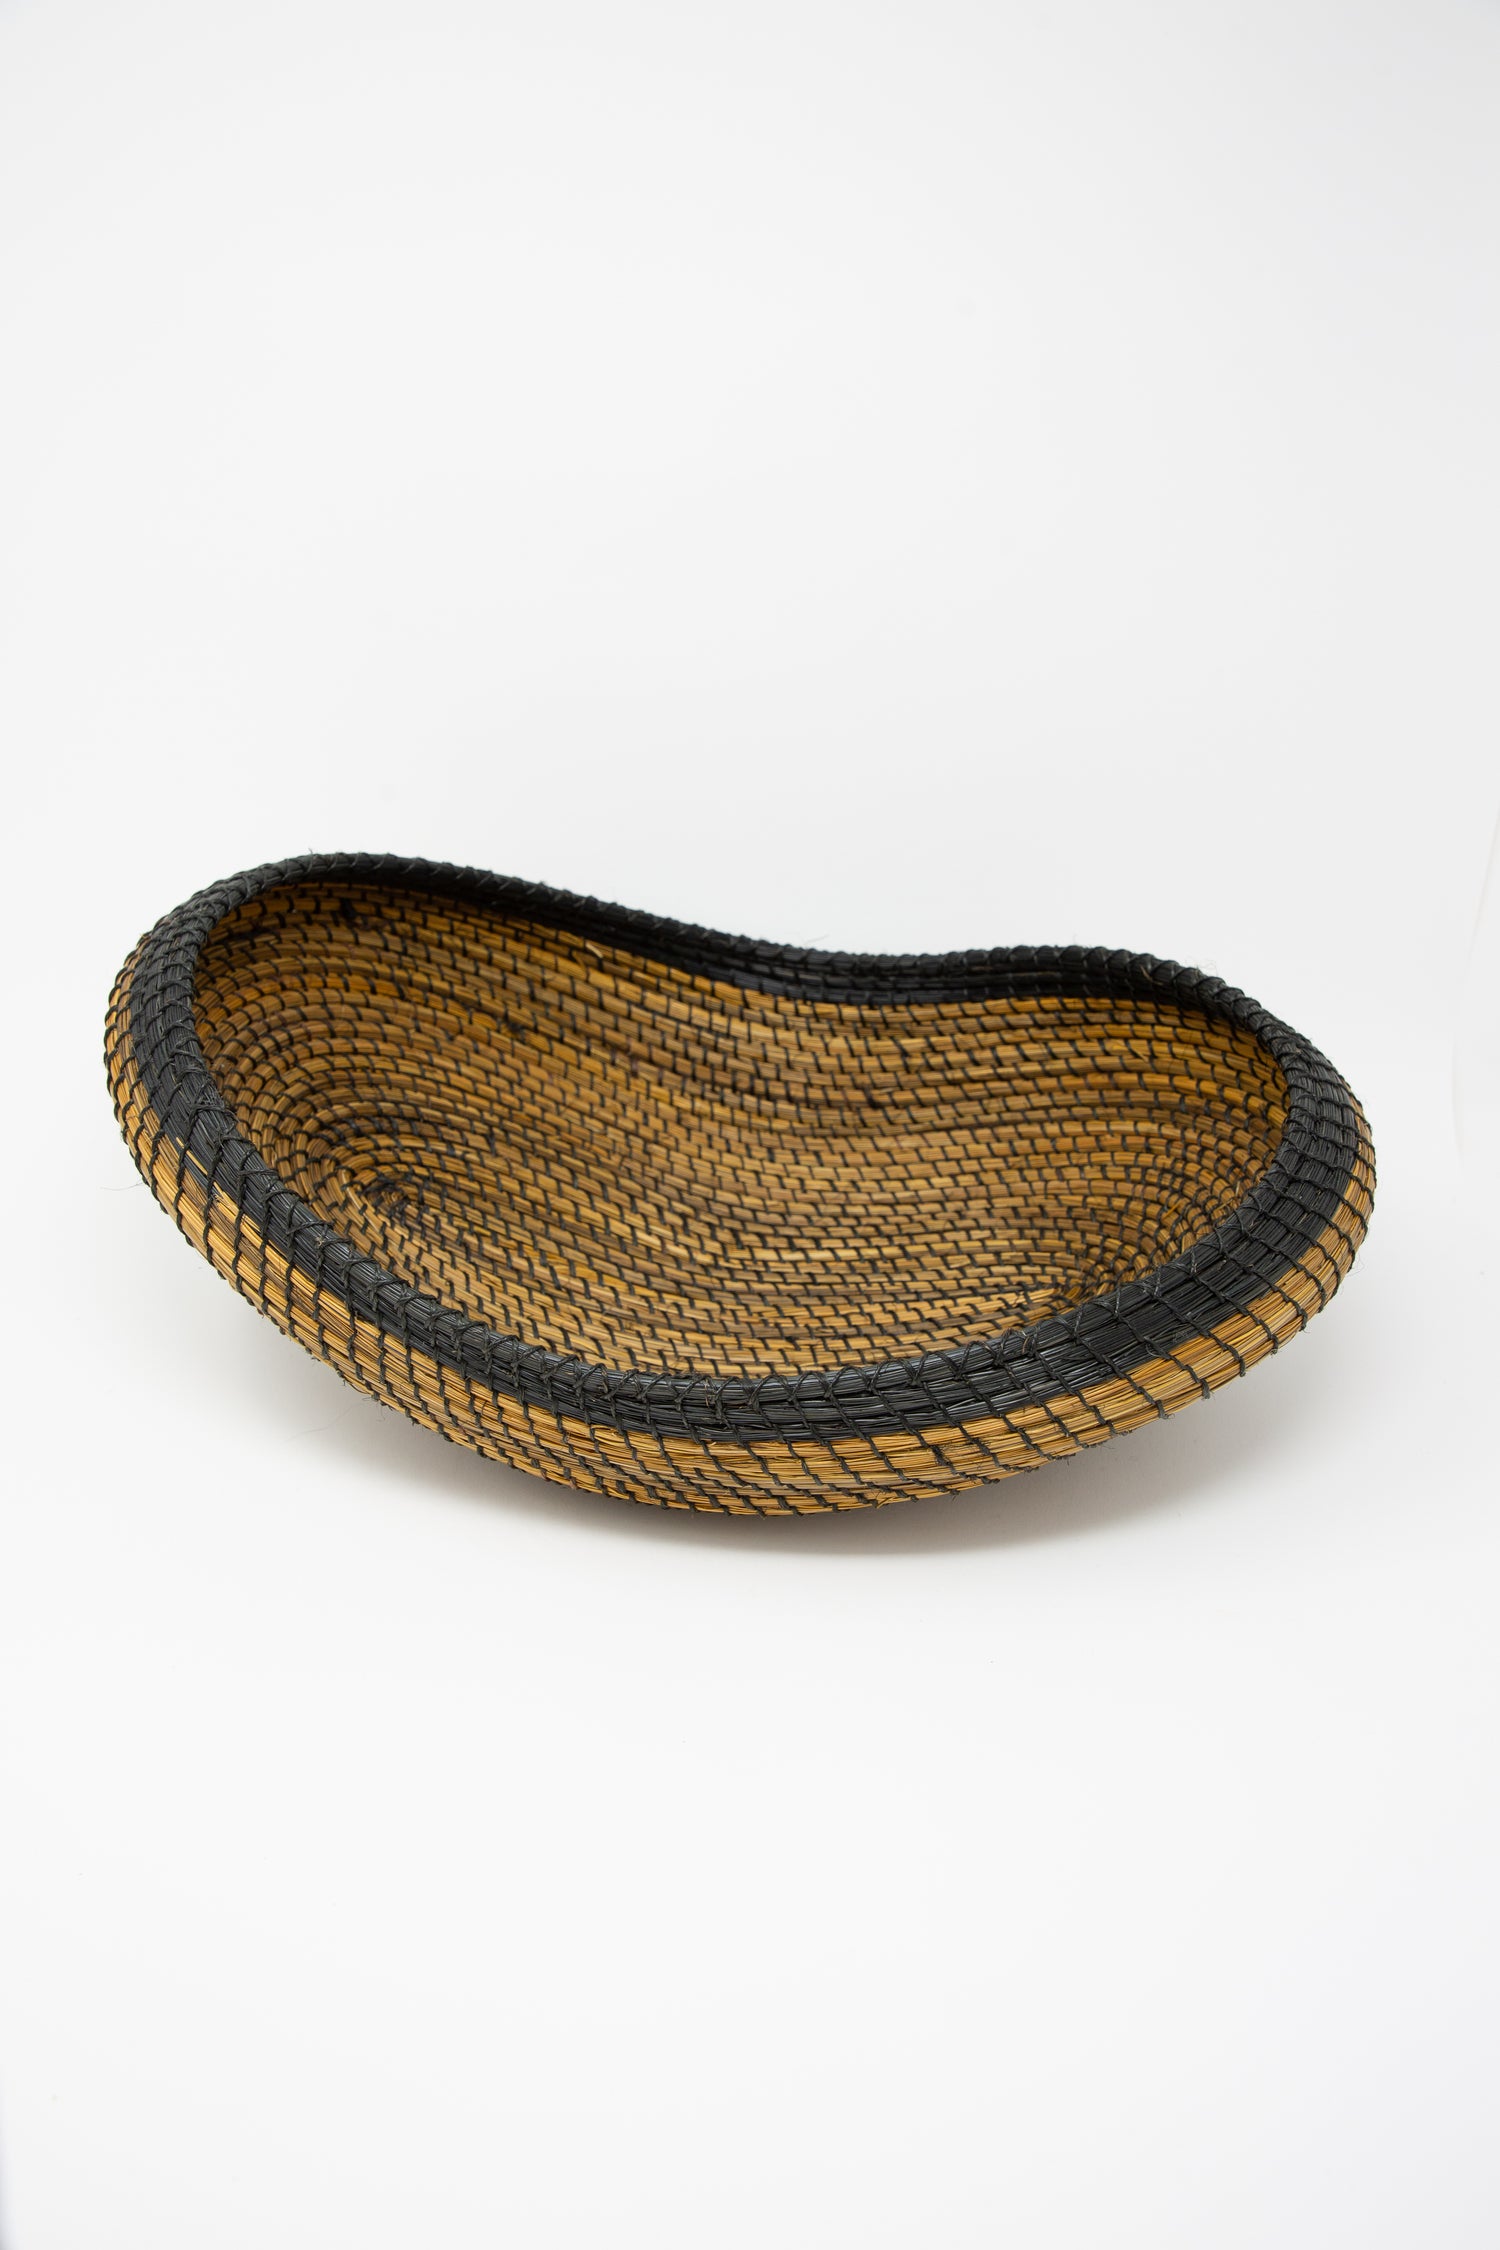 A black and brown Asopafit Canoe Basket, showcasing traditional weaving skills from Colombia by Plaza Bolivar, set against a fresh white background.